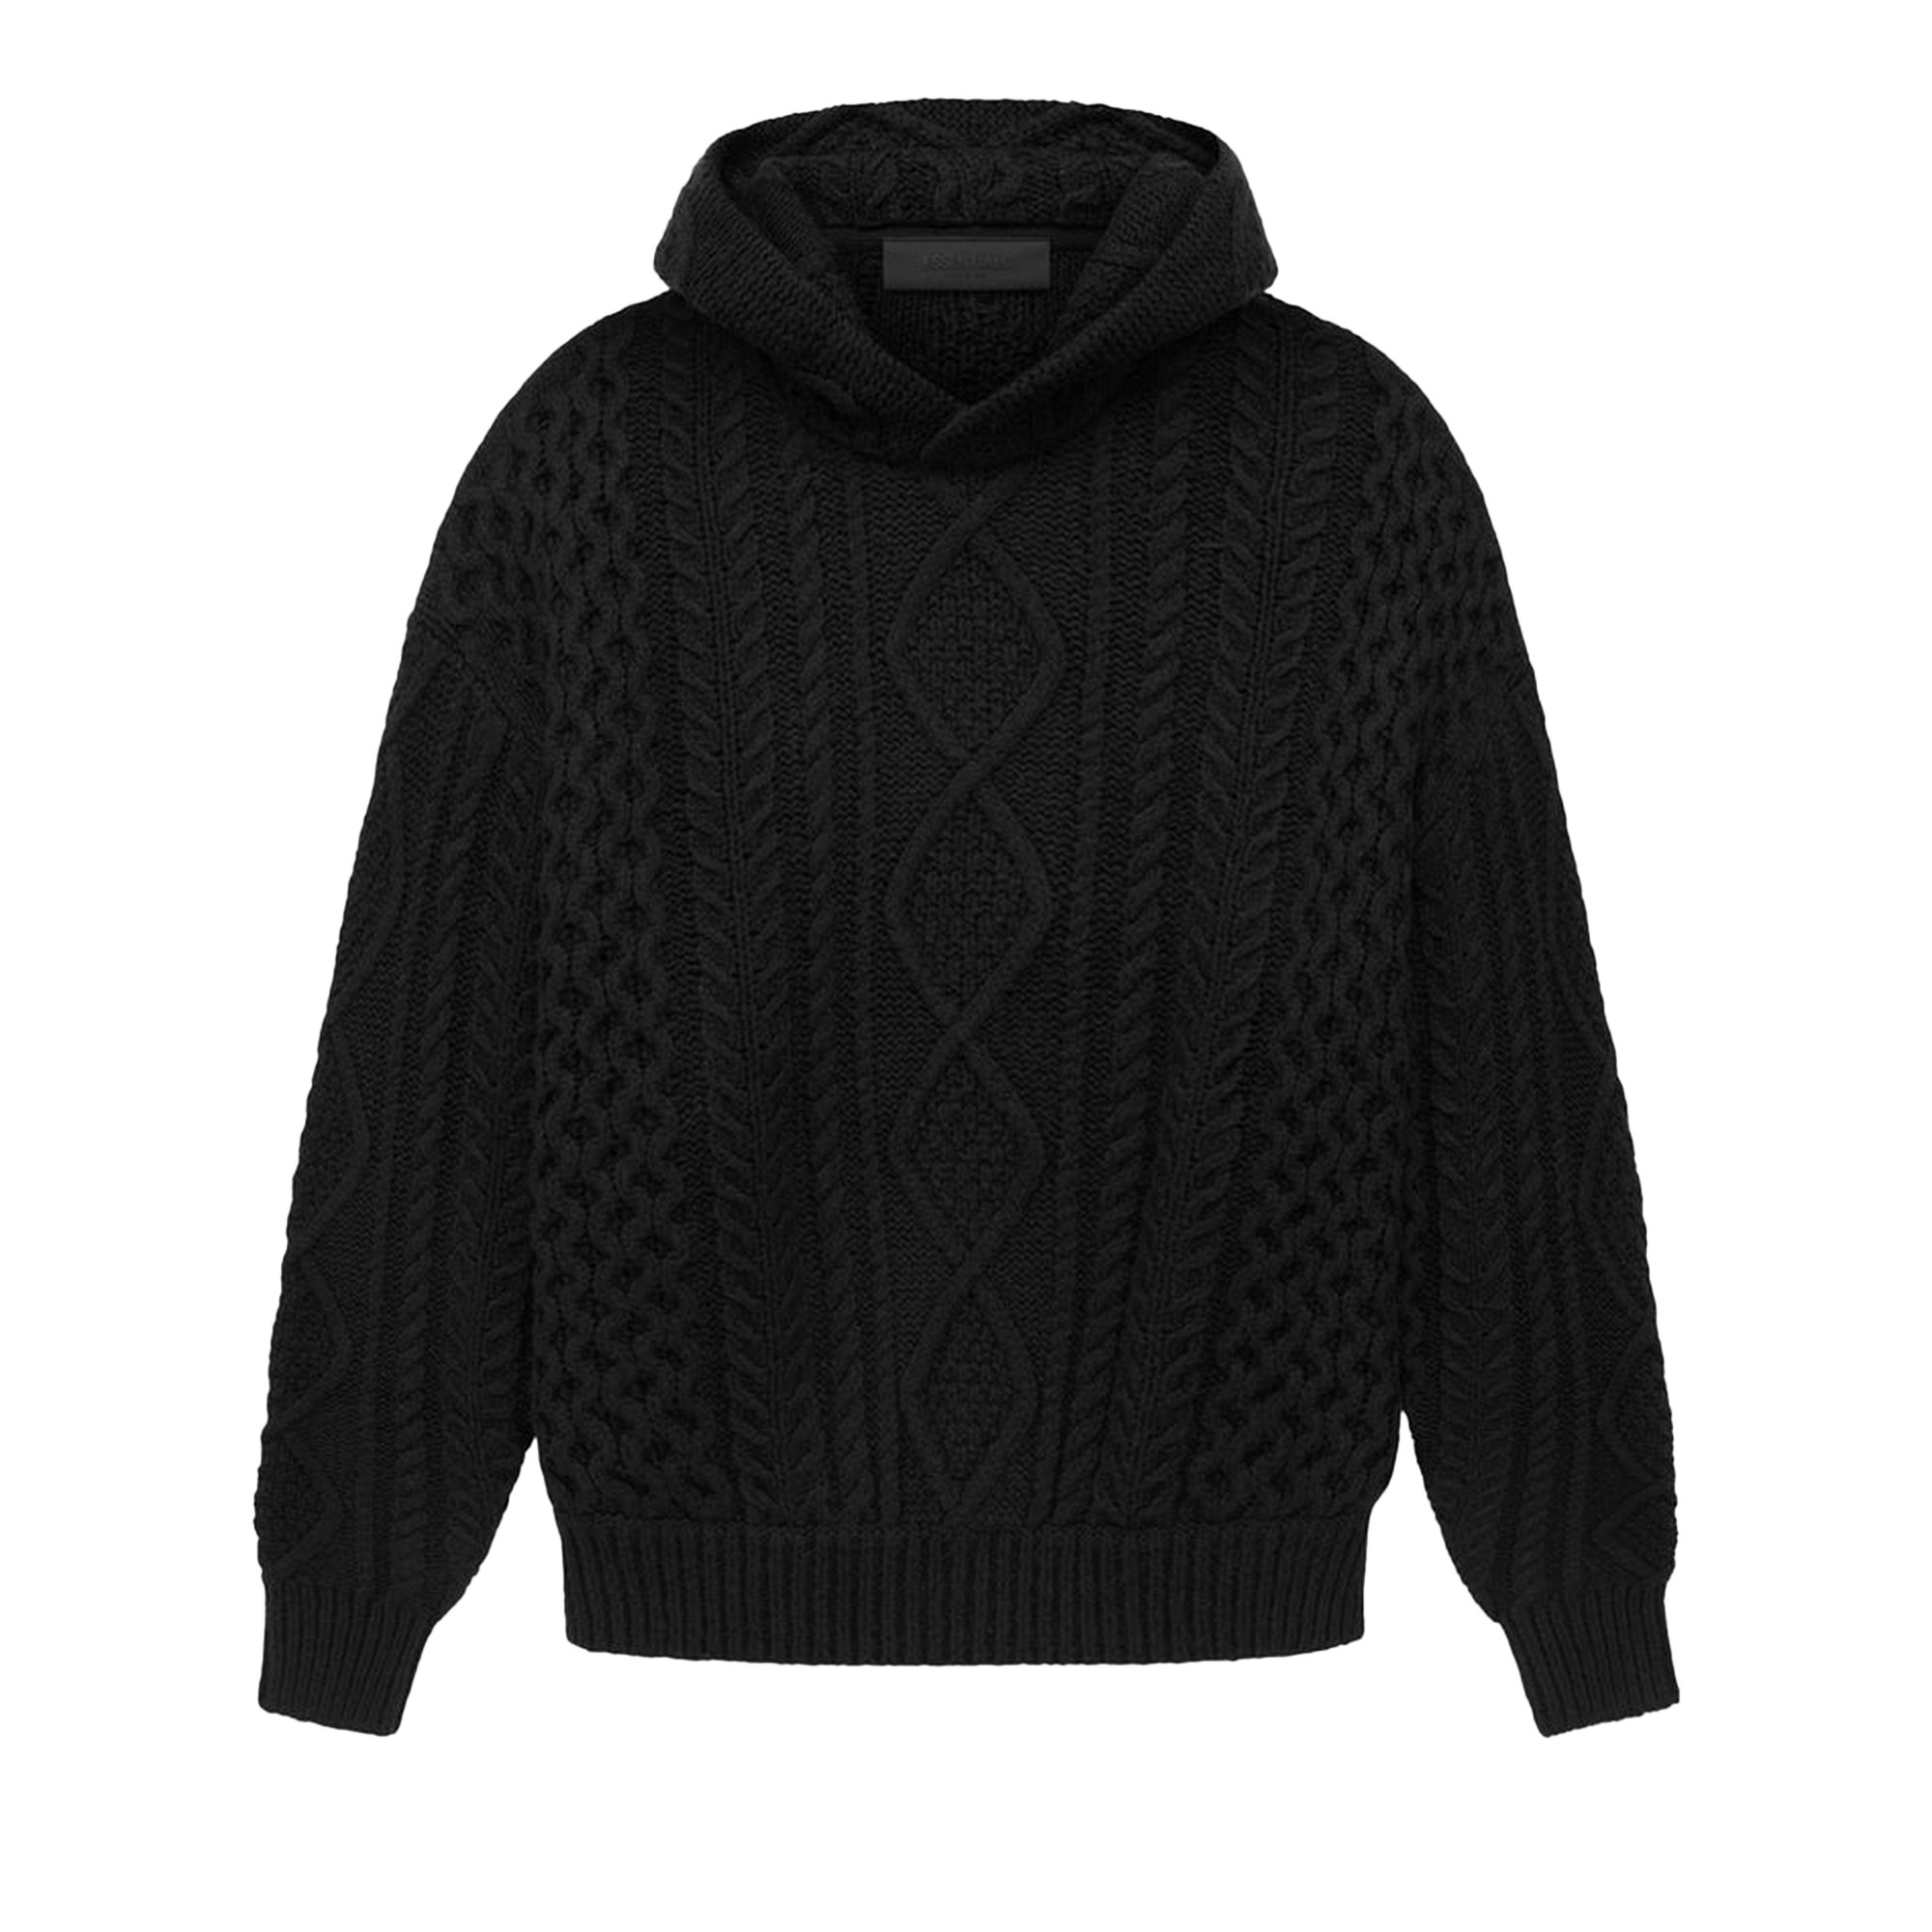 Buy Fear of God Essentials Cable Knit Hoodie 'Jet Black